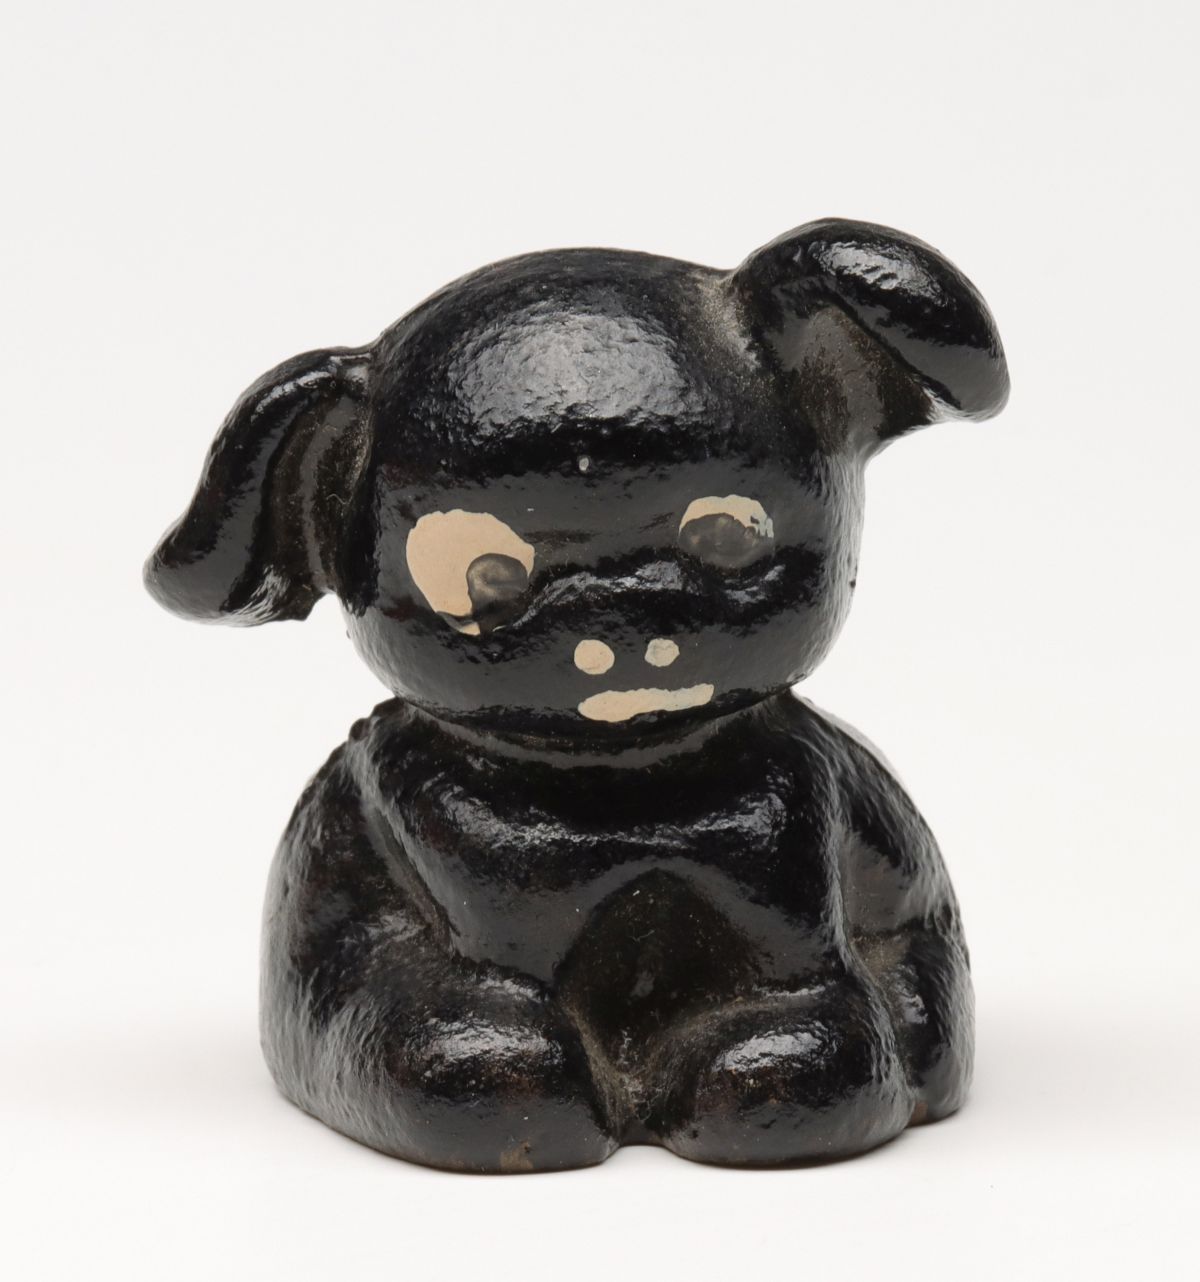 CAST IRON ANDERSON INSURANCE PUP PAPERWEIGHT